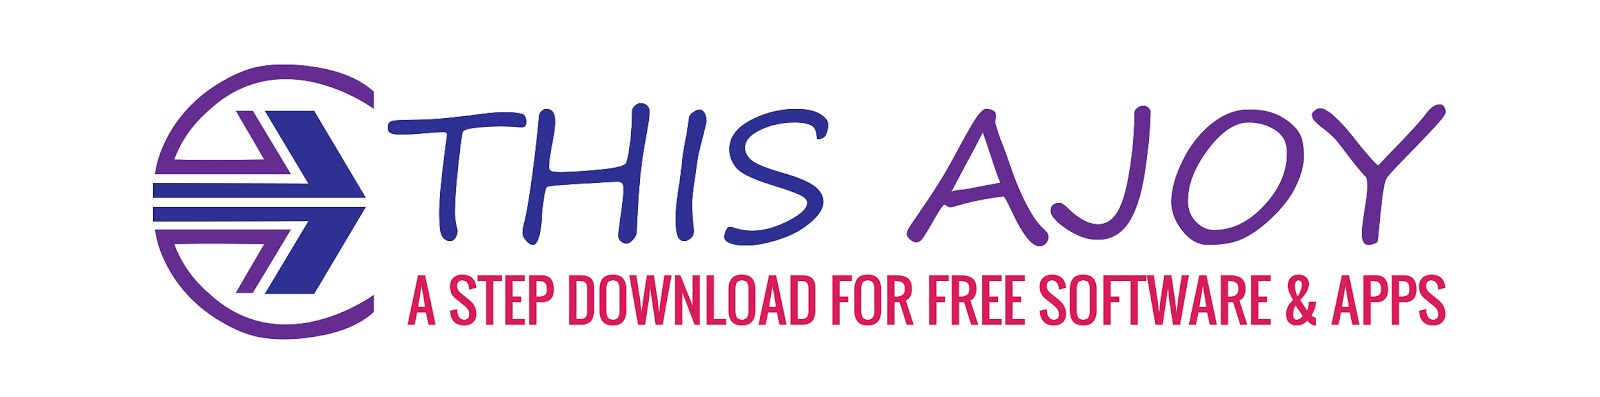 Thisajoy | Free Apps & Software